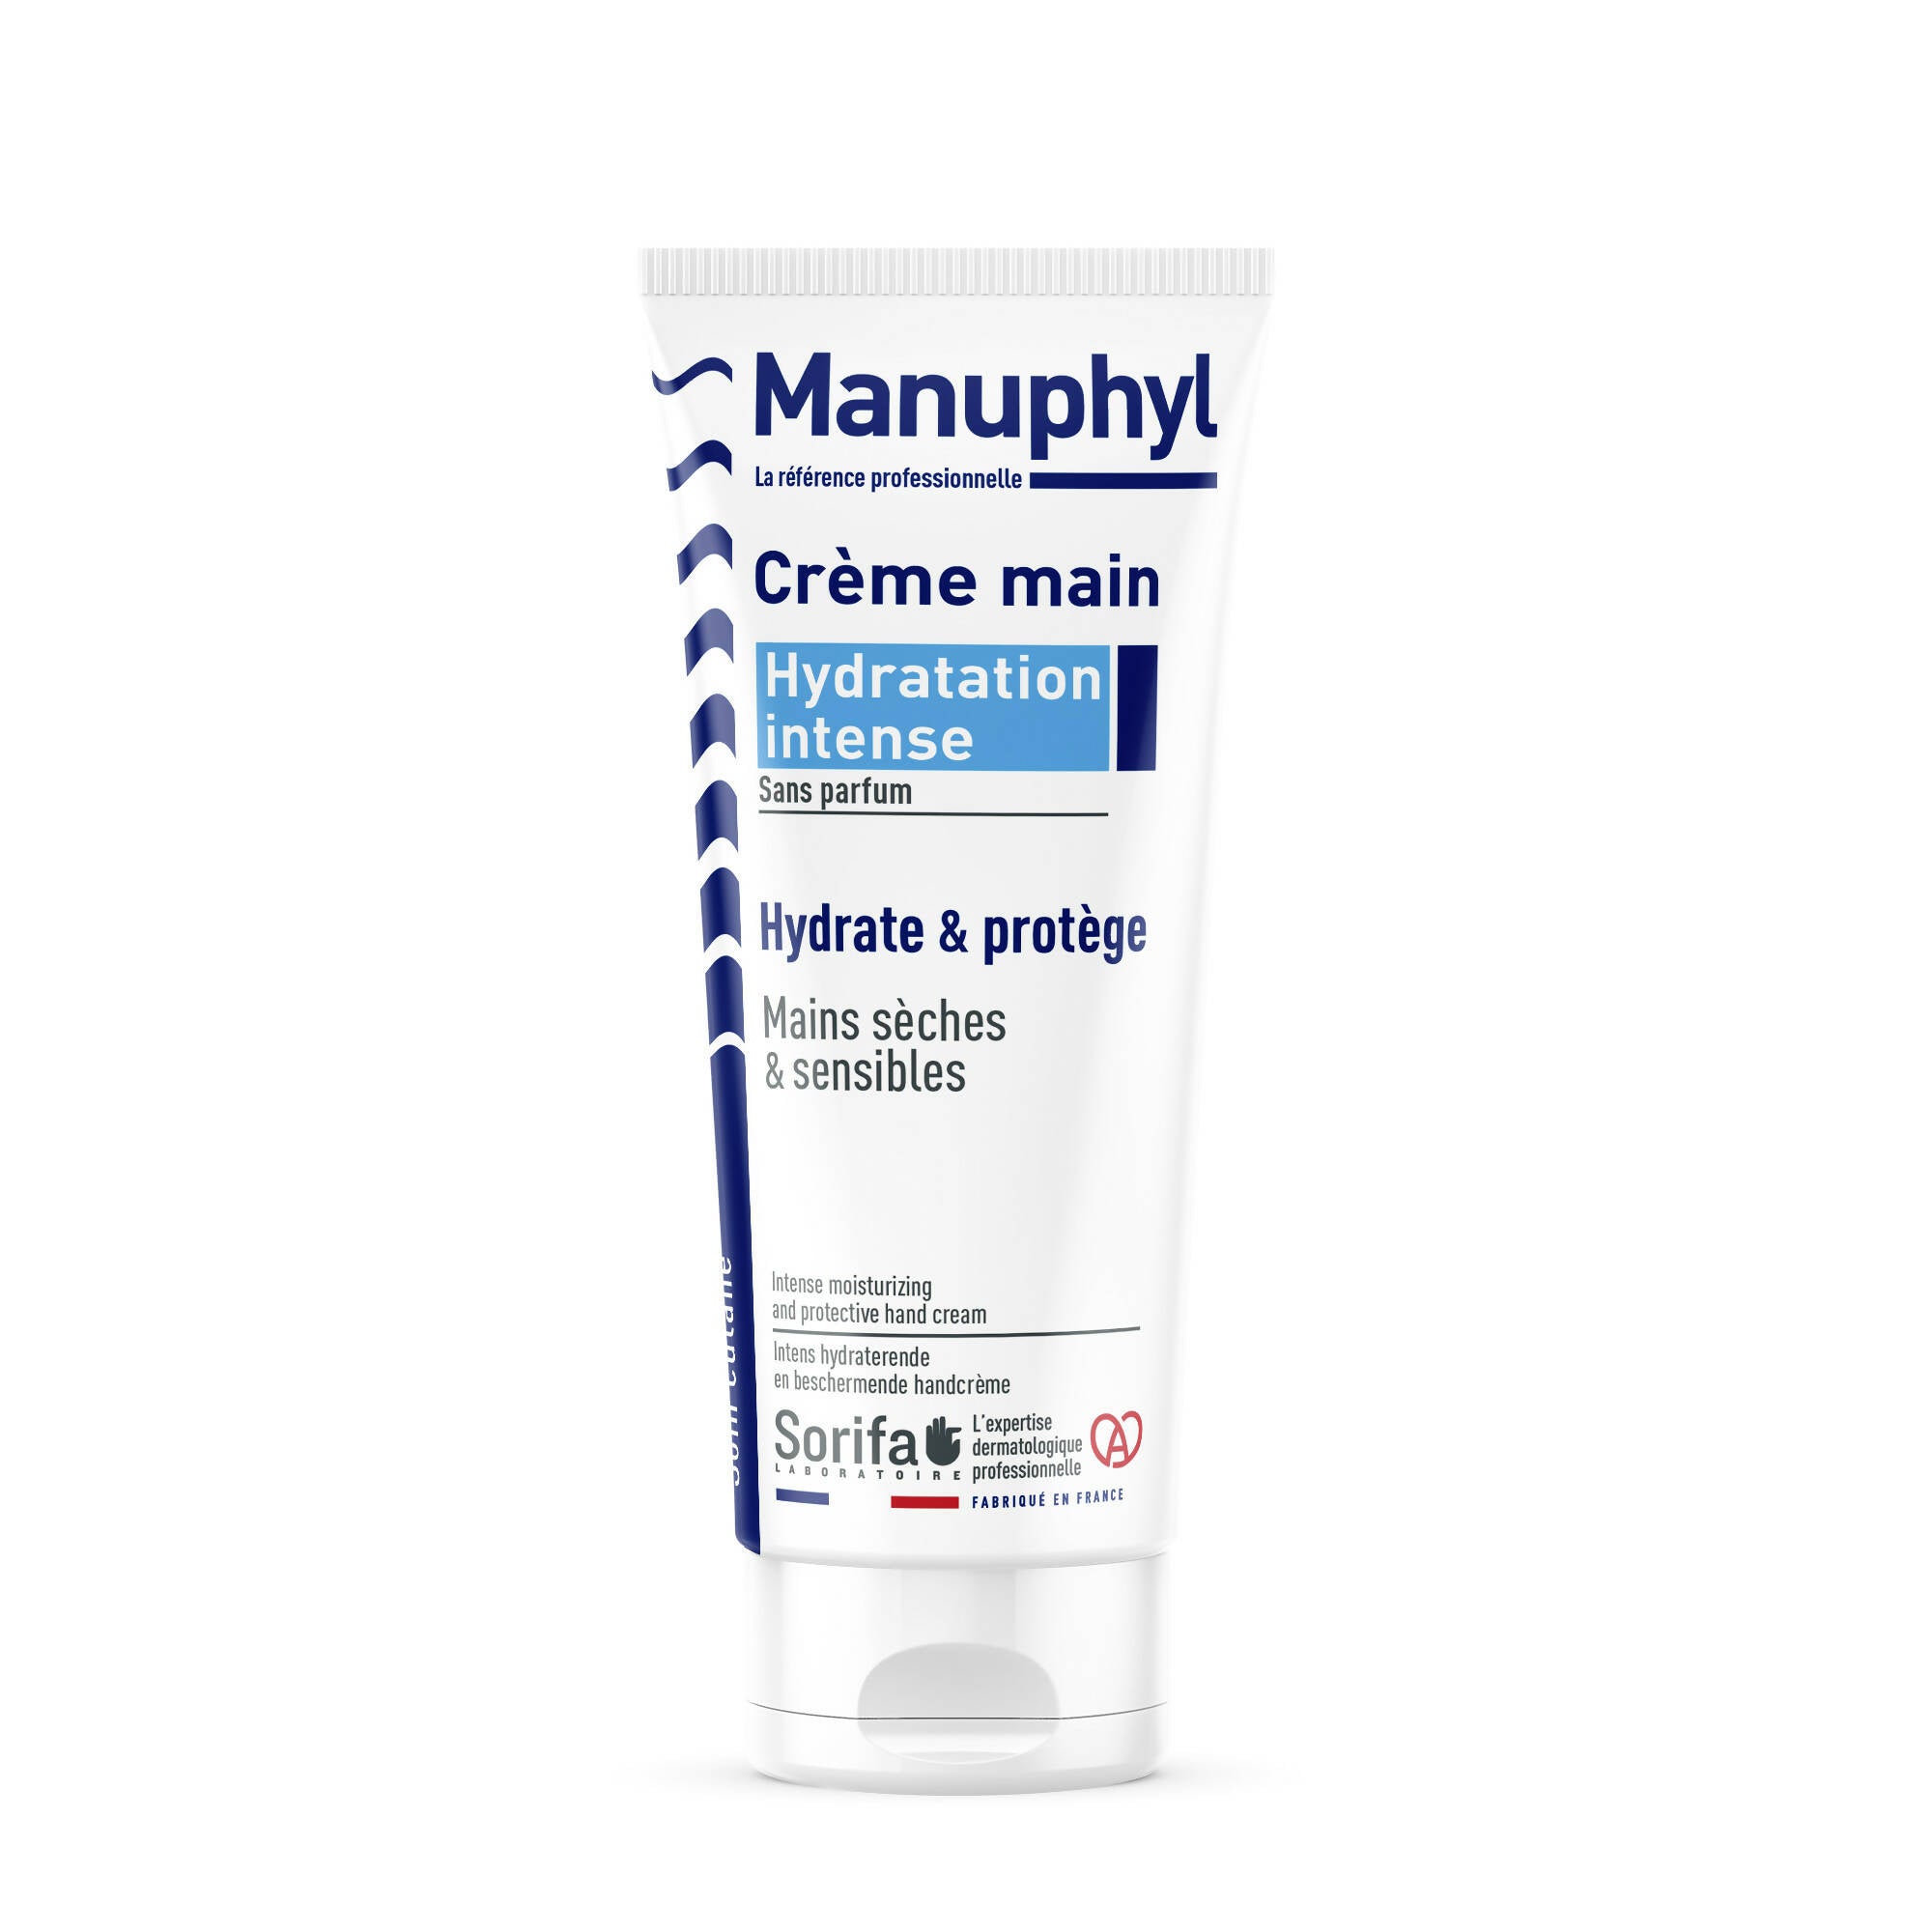 SORIFA - Complete box of 40 - Manuphyl Intense Hydration Hand Cream - Moisturizing and protective - Dry and sensitive hands - Non-greasy, fragrance-free, enriched with Allantoin and wheat proteins - 100 ml tube - 0